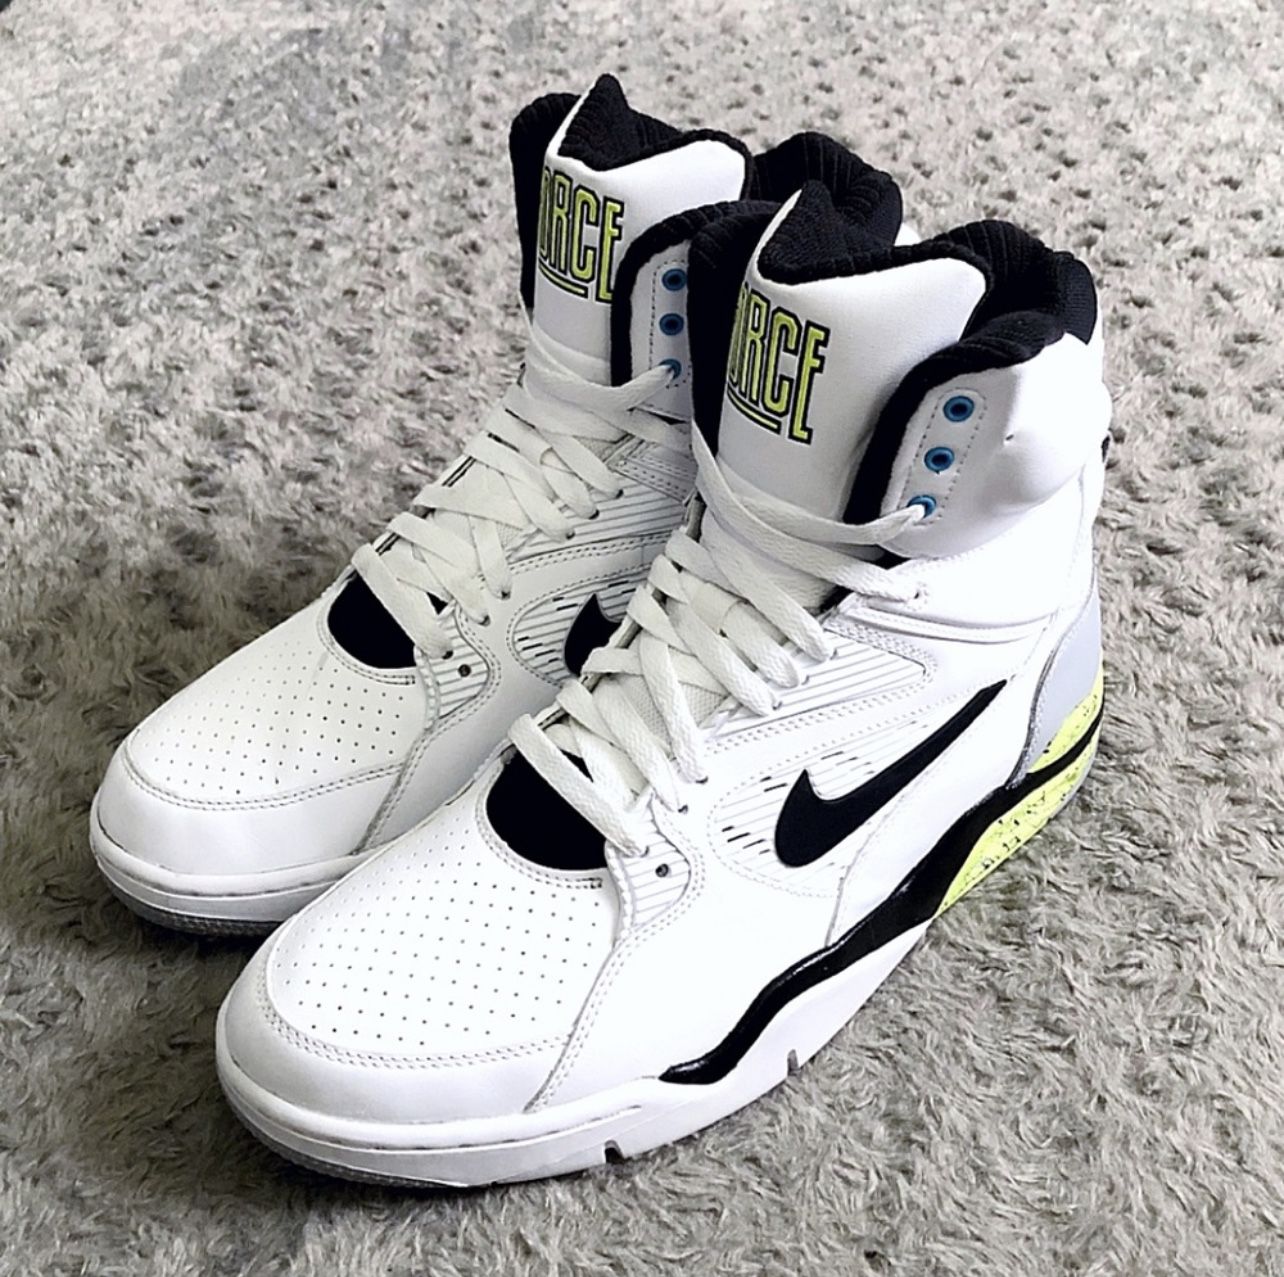 Men's Nike Air Command Force Pumps Billy Hoyle sneakers. Released 2014  Color White/Black-Wolf Grey-Volt Men's Style# 684715-100 Great condition!  (no b for Sale in Washington, DC - OfferUp